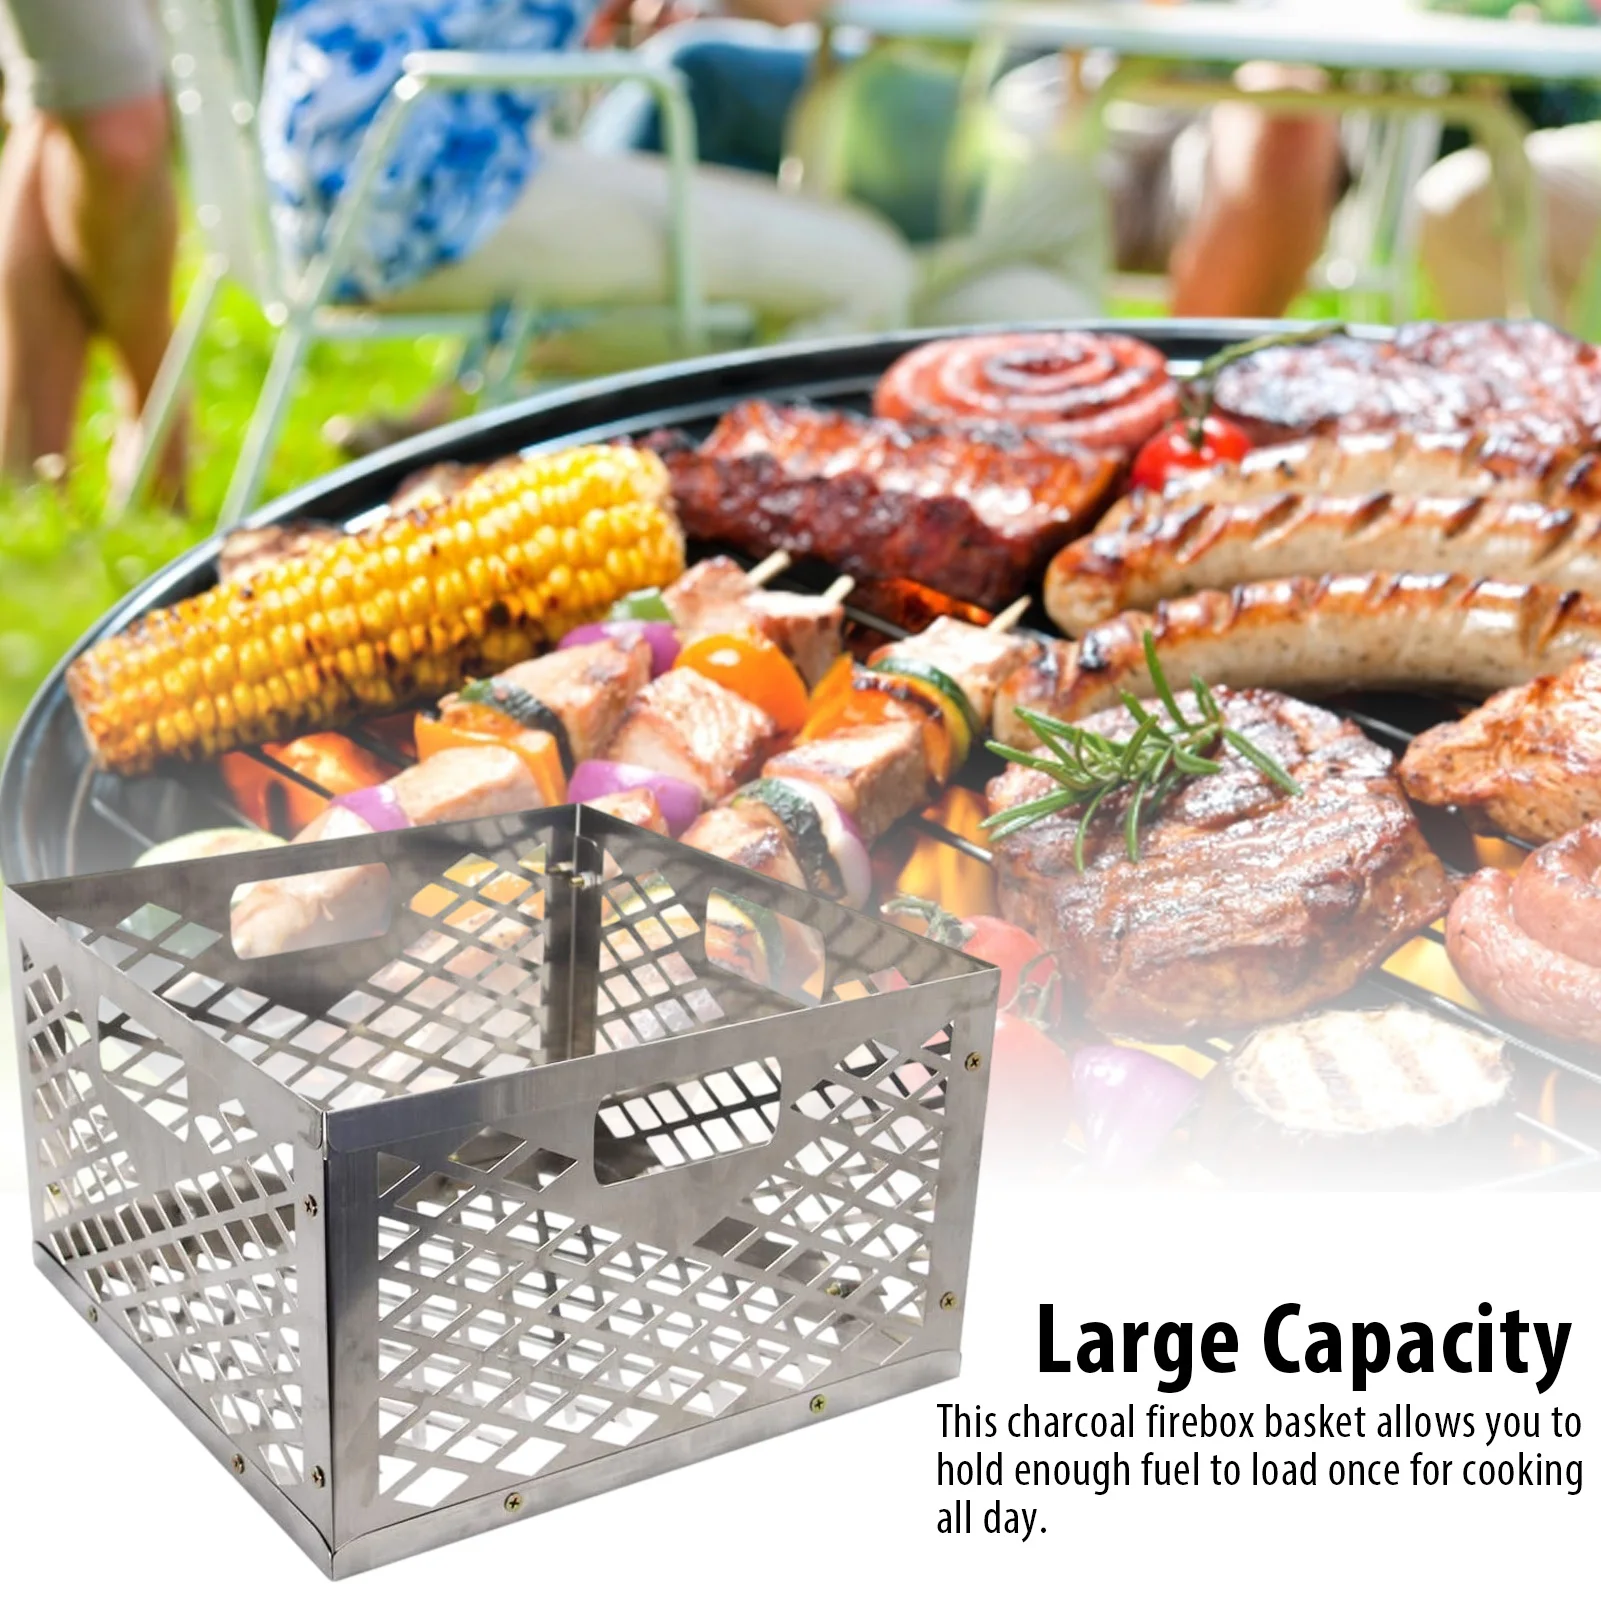 

Stainless Steel Charcoal Firebox Basket Box Portable Cooking Barbecue For Offset Smoker Tool Accessories